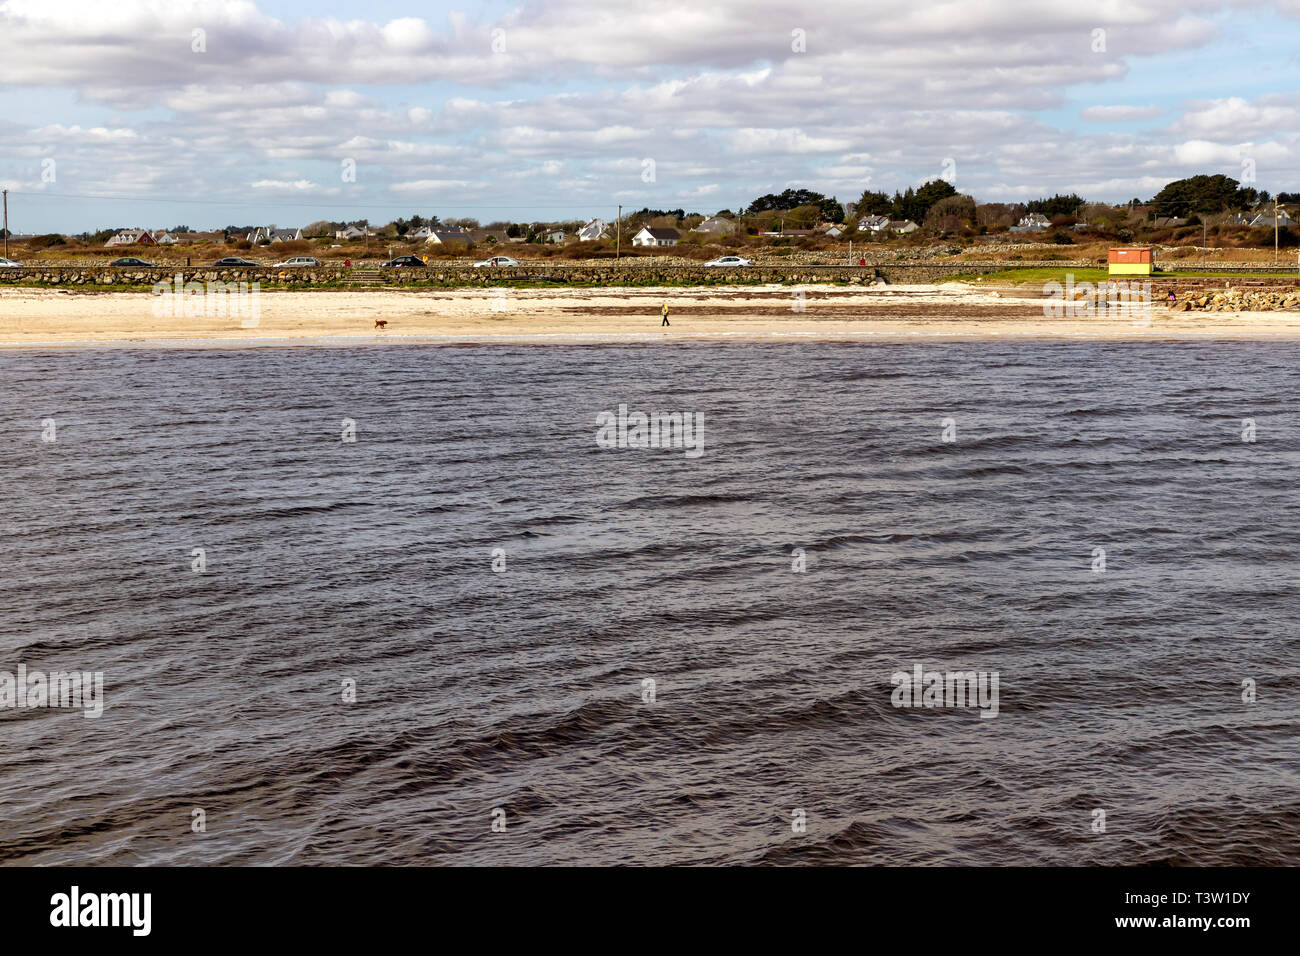 Beach with sand and buildings in Galway Bay, Spiddal, Galway, Ireland Stock Photo